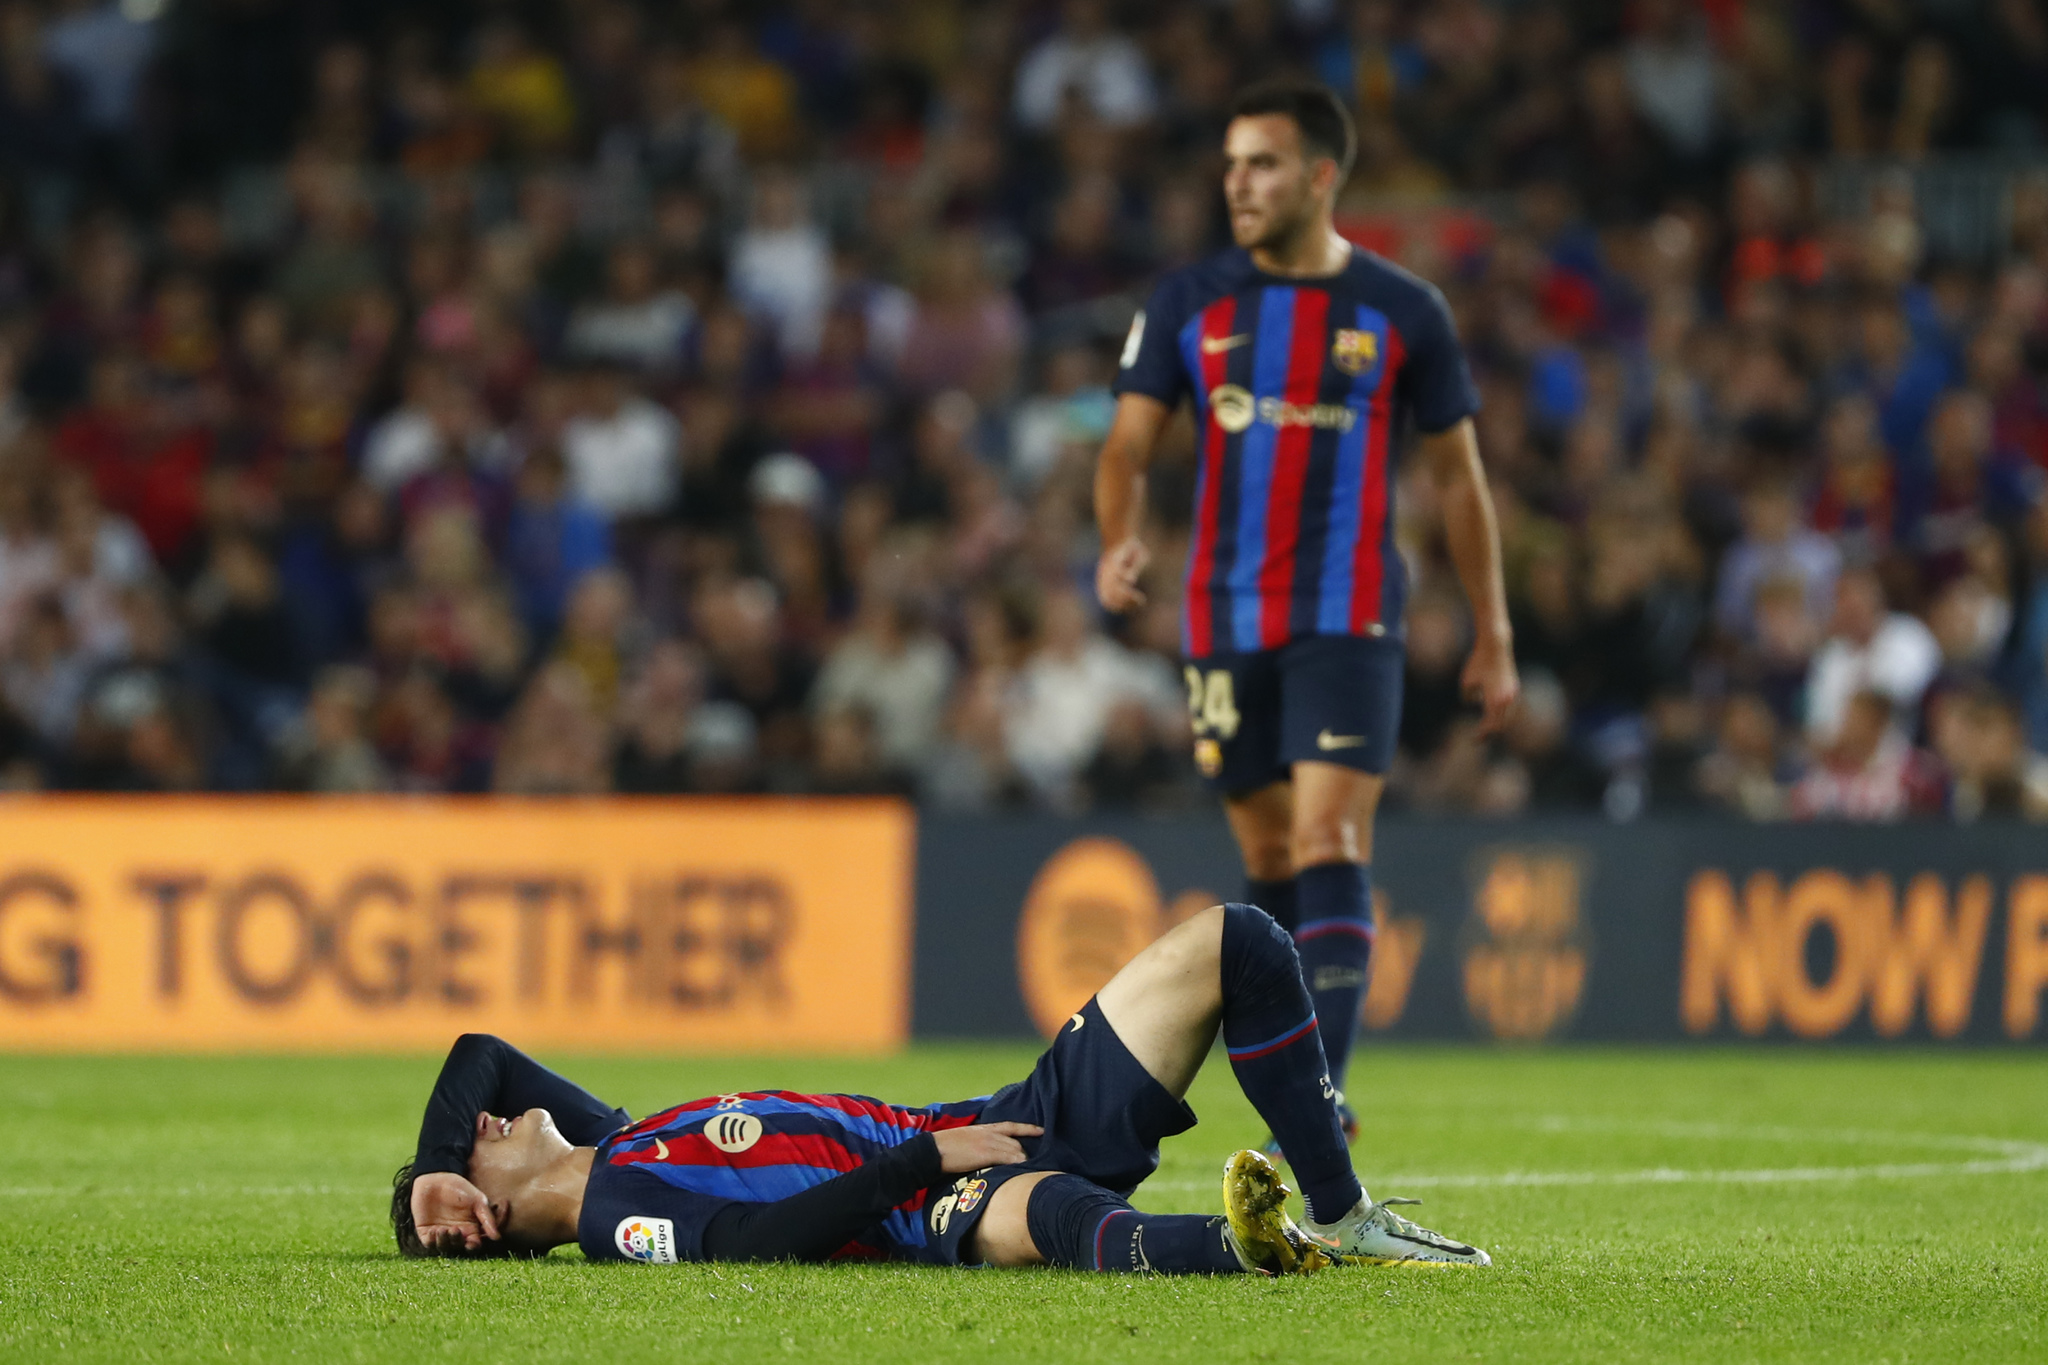  lt;HIT gt;Barcelona lt;/HIT gt;'s Gavi grimaces in pain on the ground during a Spanish La Liga soccer match between  lt;HIT gt;Barcelona lt;/HIT gt; and Athletic Club at the Camp Nou stadium in  lt;HIT gt;Barcelona lt;/HIT gt;, Spain, Sunday, Oct. 23, 2022. (AP Photo/Joan Monfort)